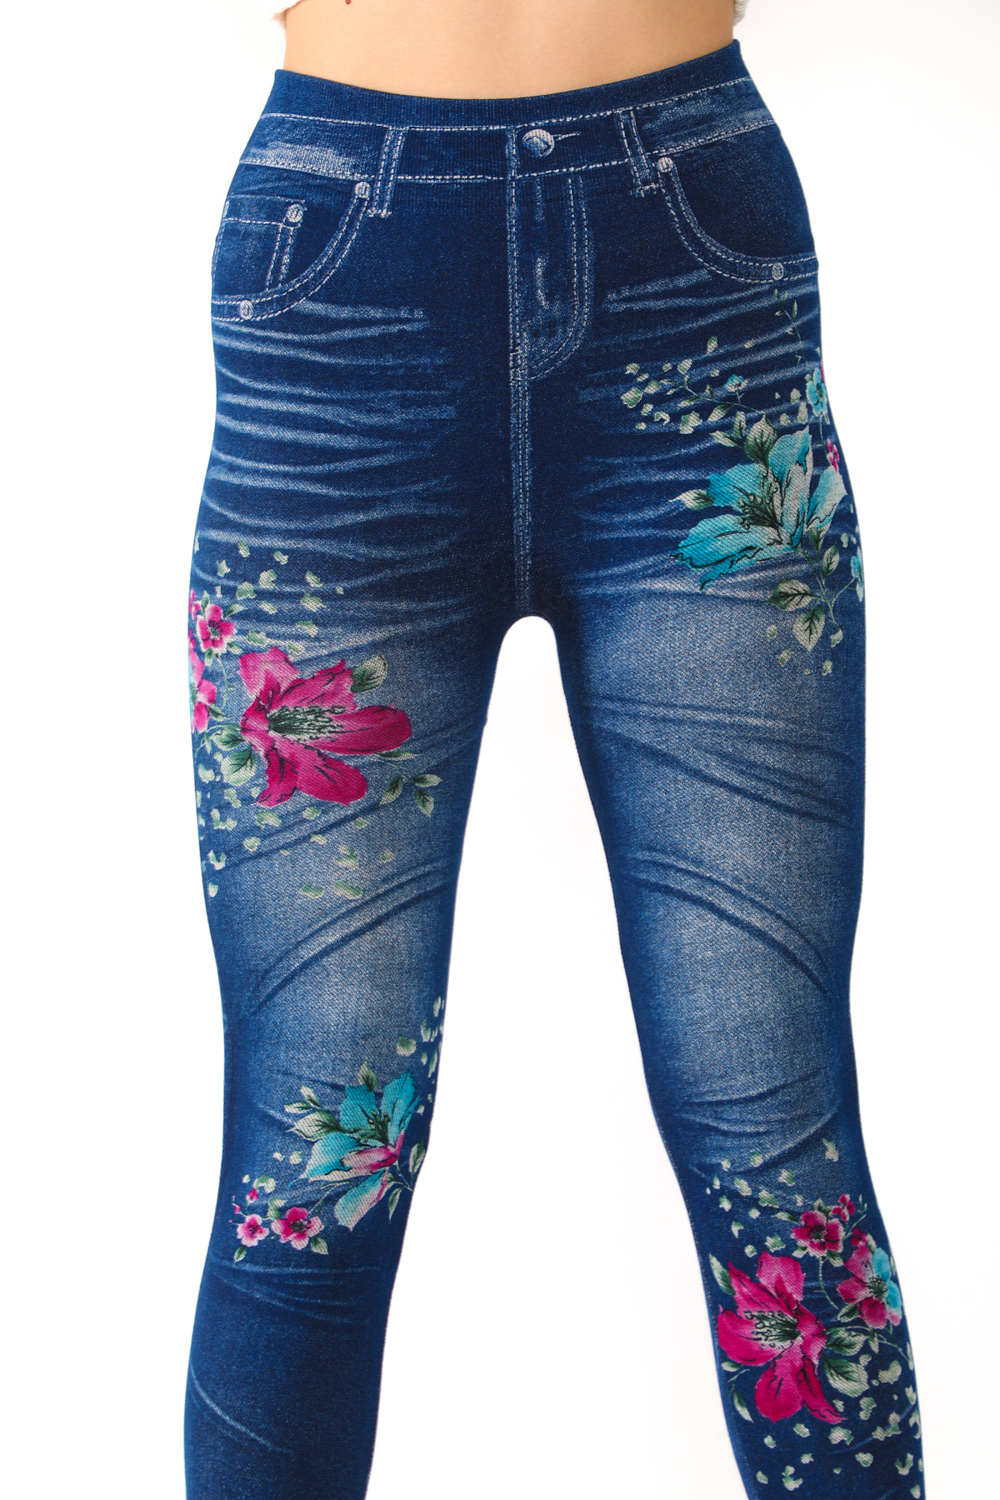 Jeggings with Asymmetric Floral Patterns - Its All Leggings